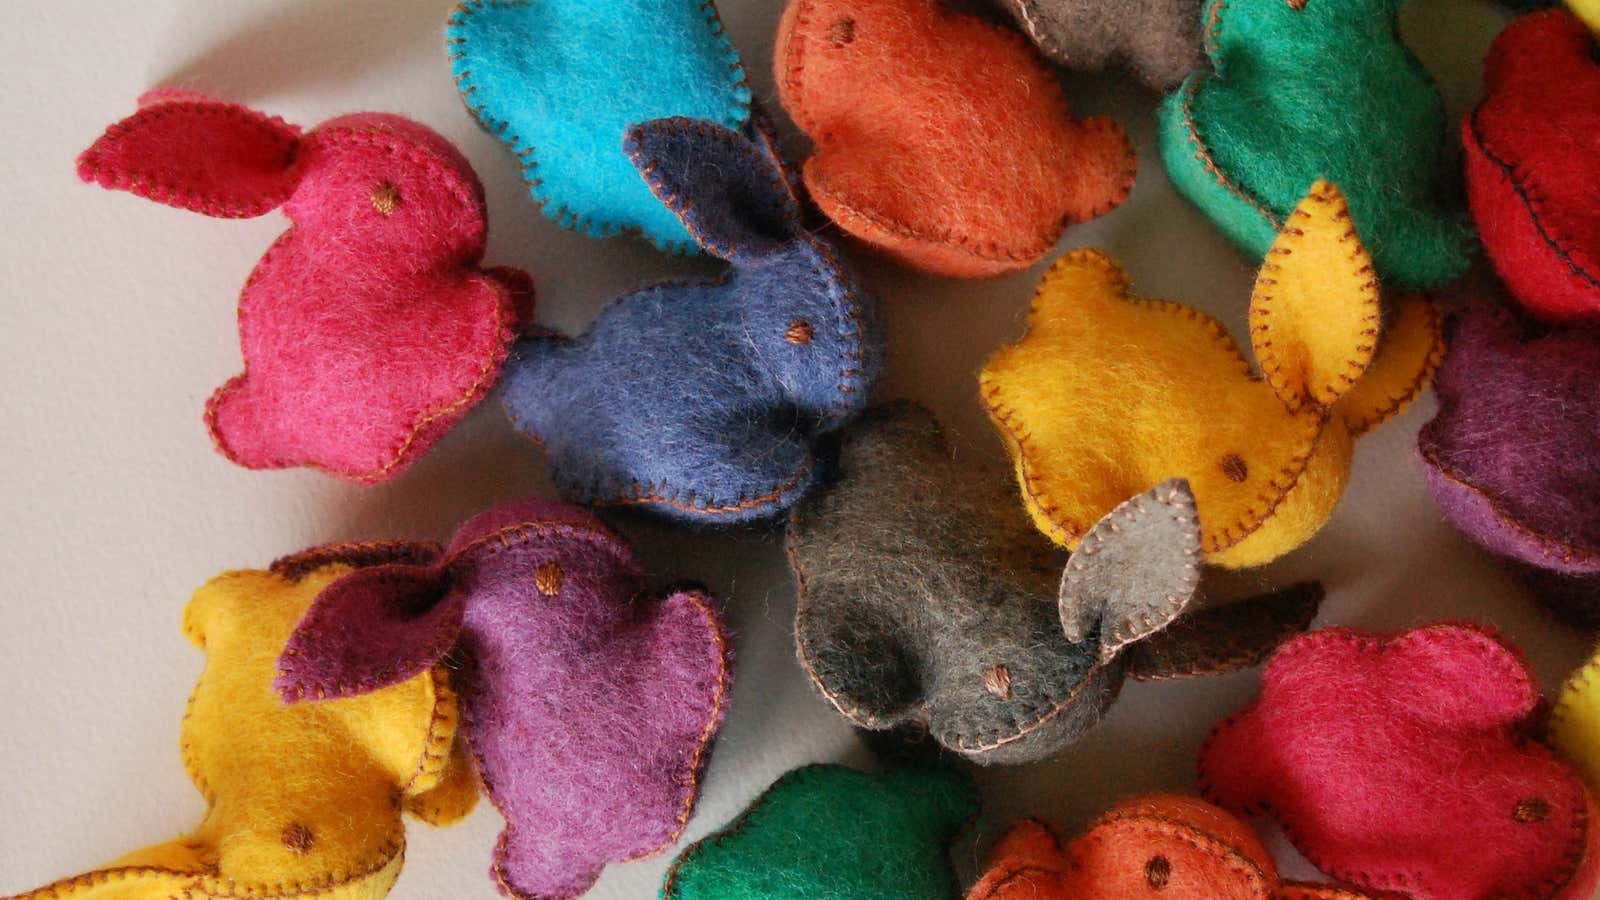 Etsy: No profits, but many “winsome stuffed felted bunnies.”